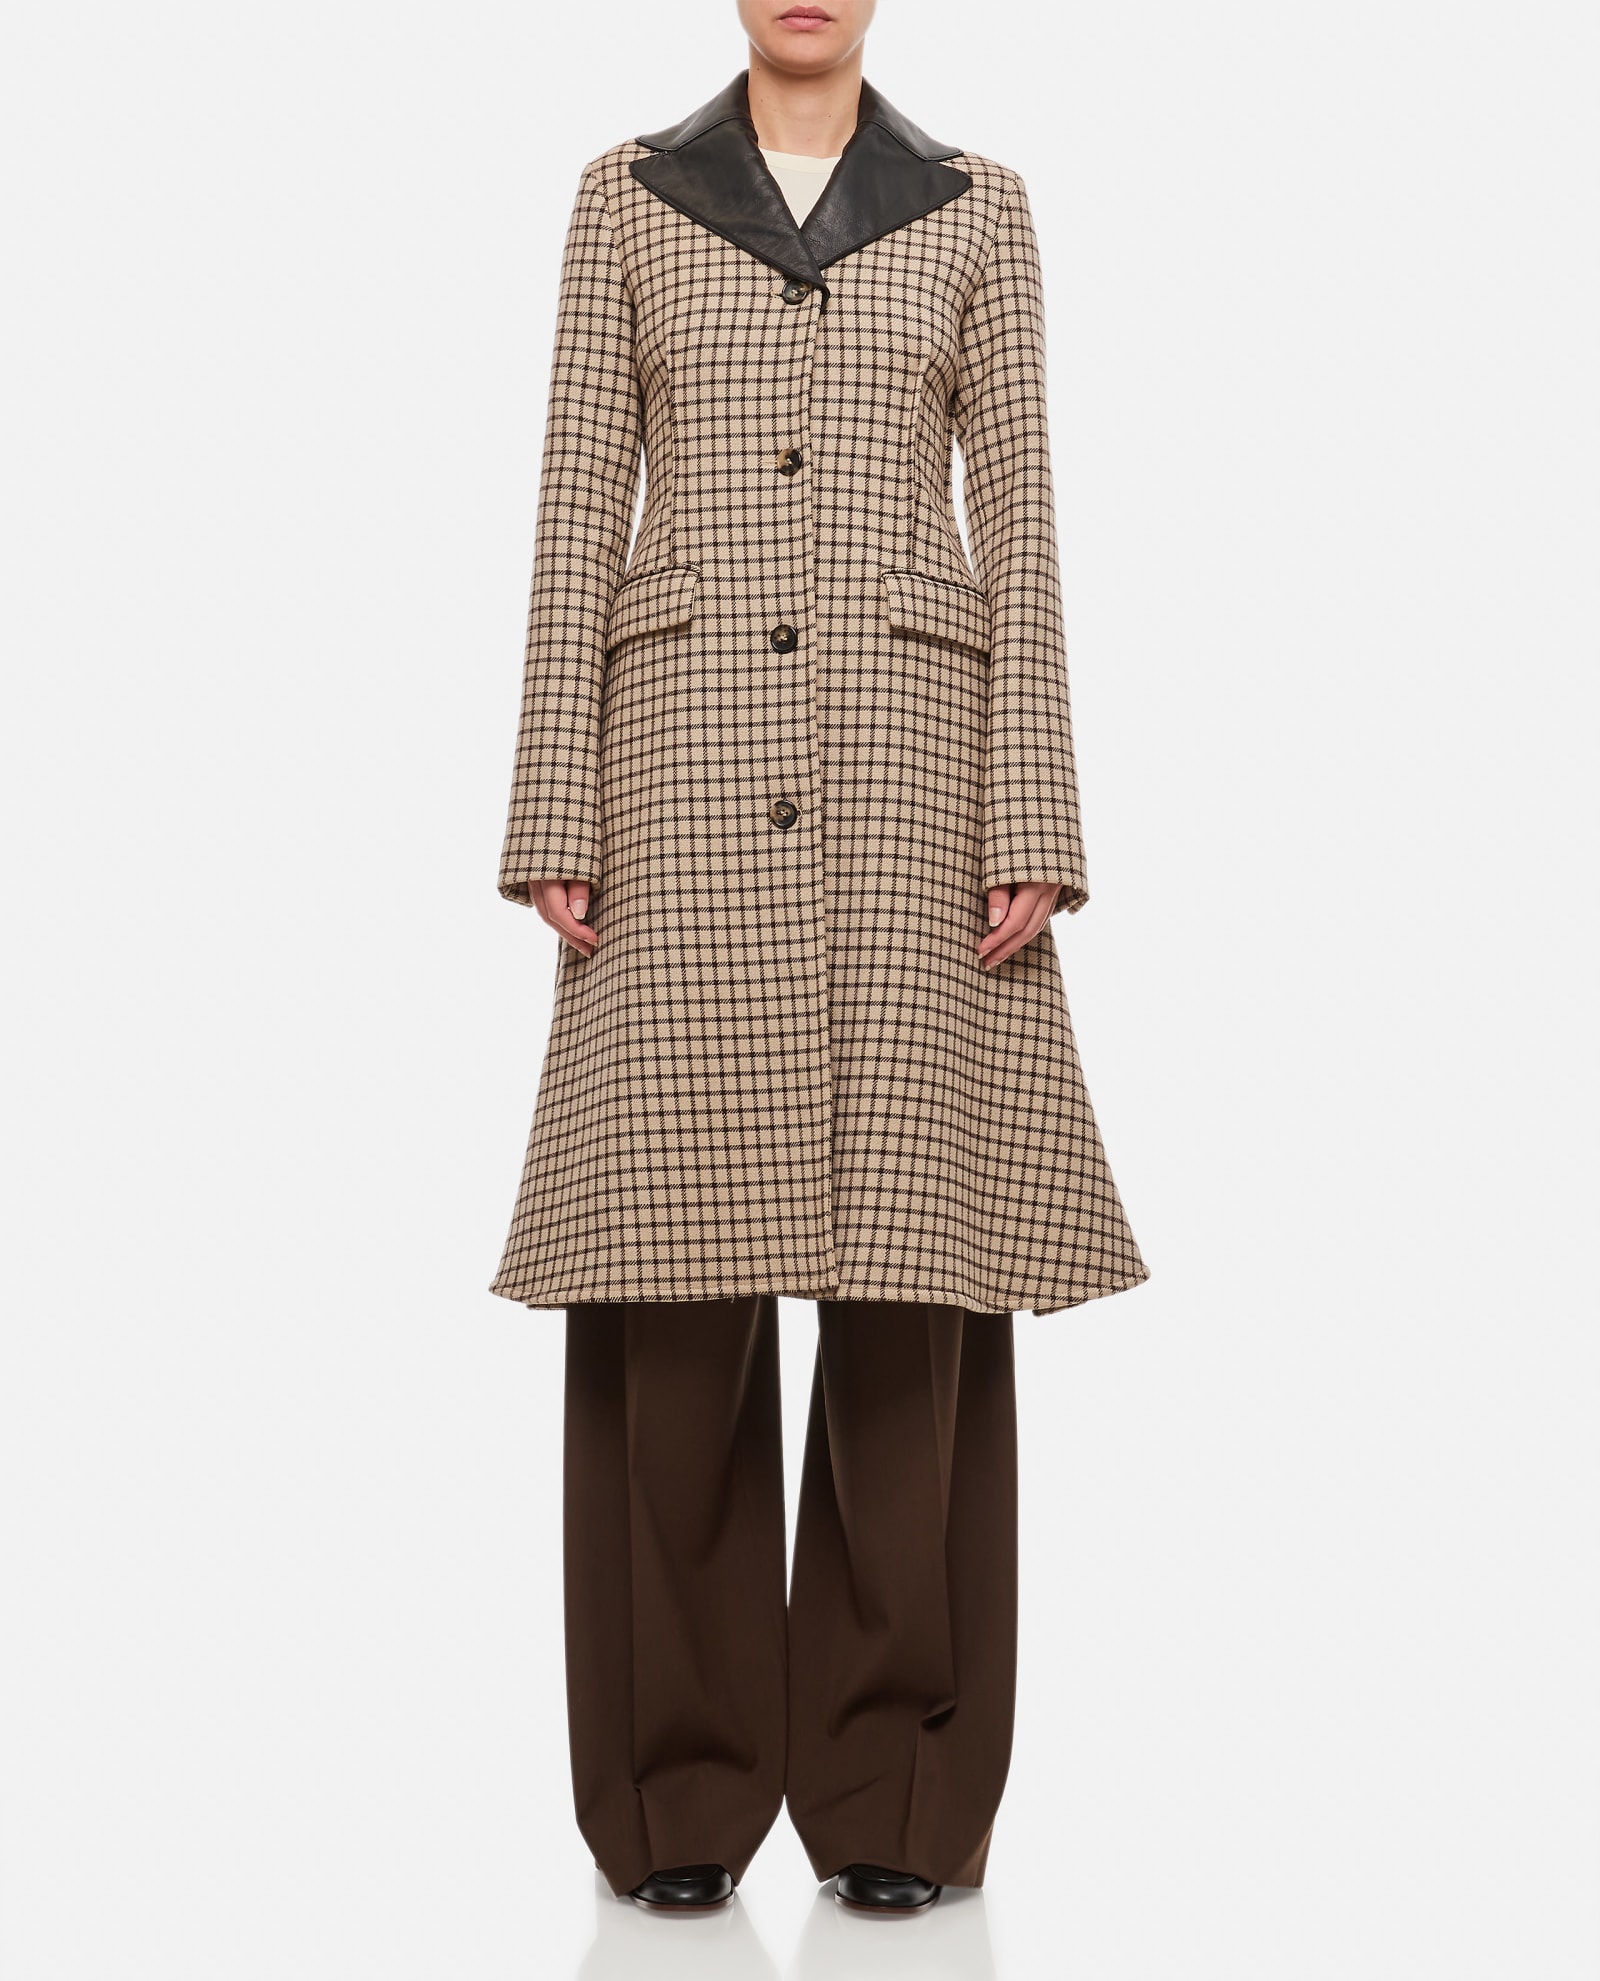 JW ANDERSON A LINE SINGLE-BREASTED WOOL COAT